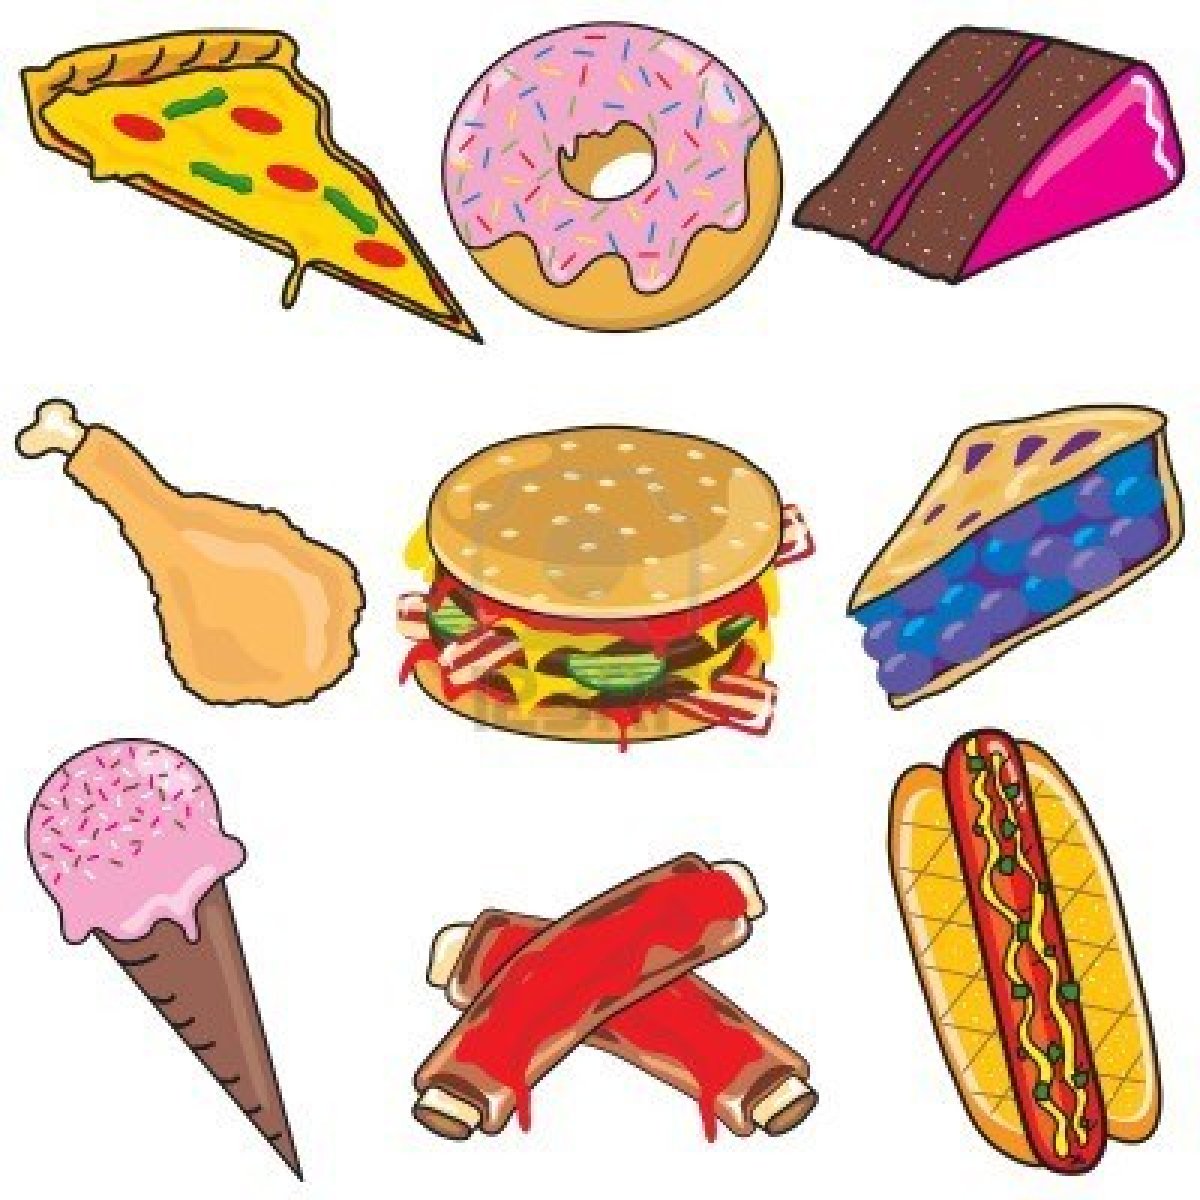 Unhealthy Food Clipart Images & Pictures - Becuo